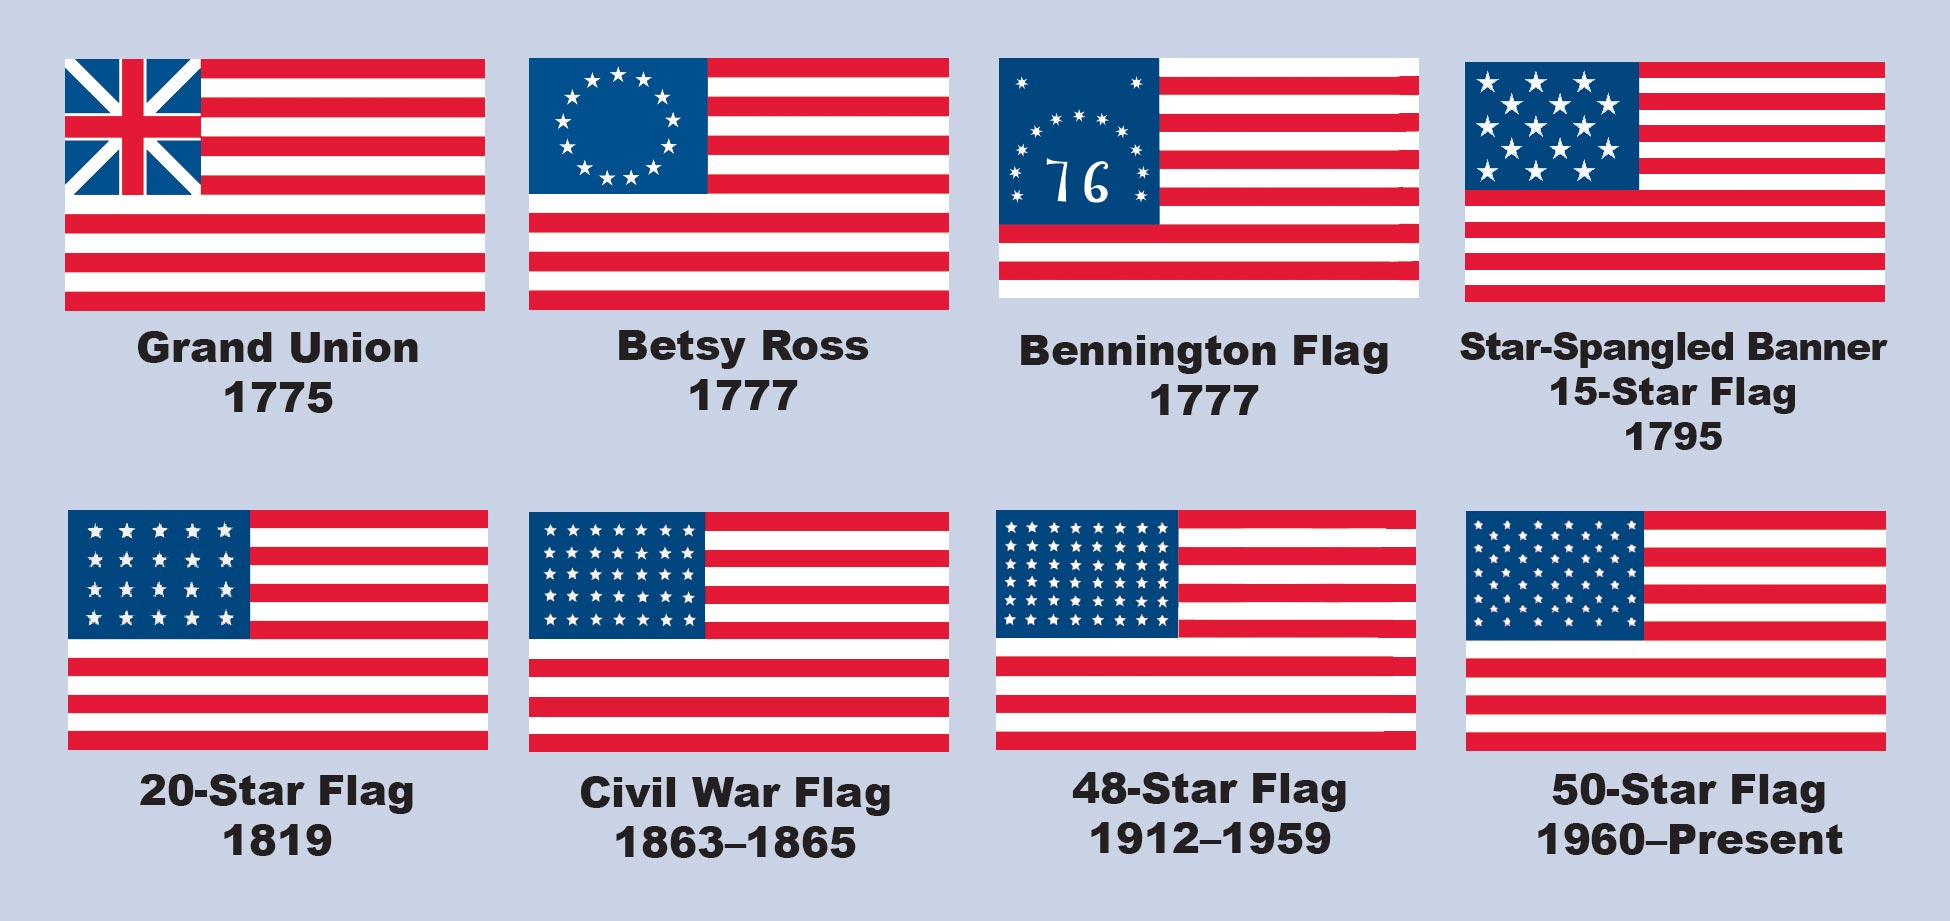 Many different flags have flown over the United States